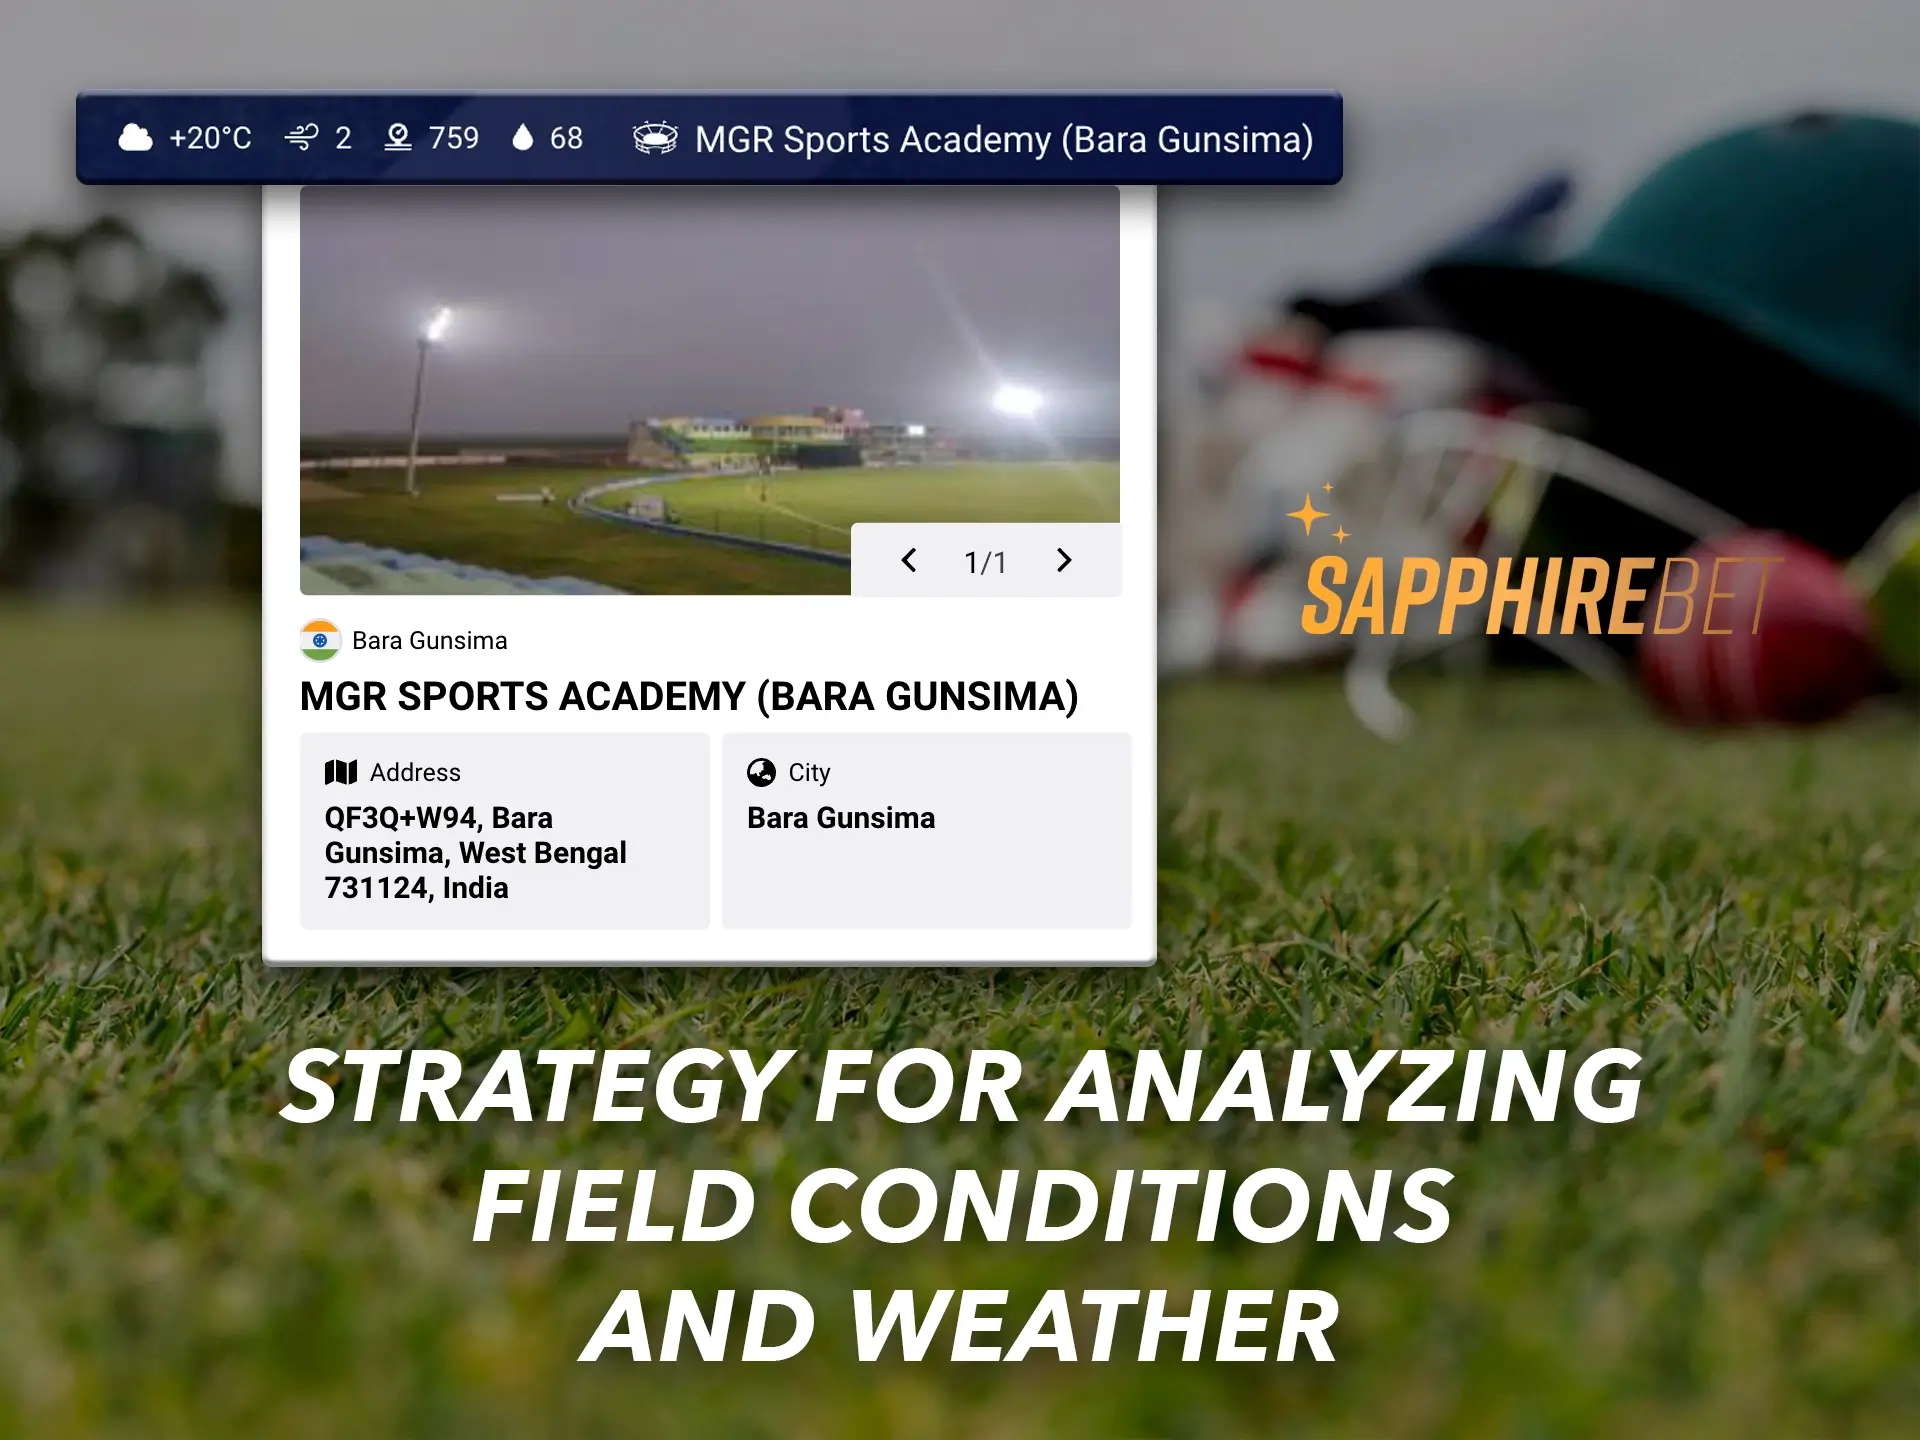 Sapphirebet provides complete information about the weather and the stadium where the cricket game is played.